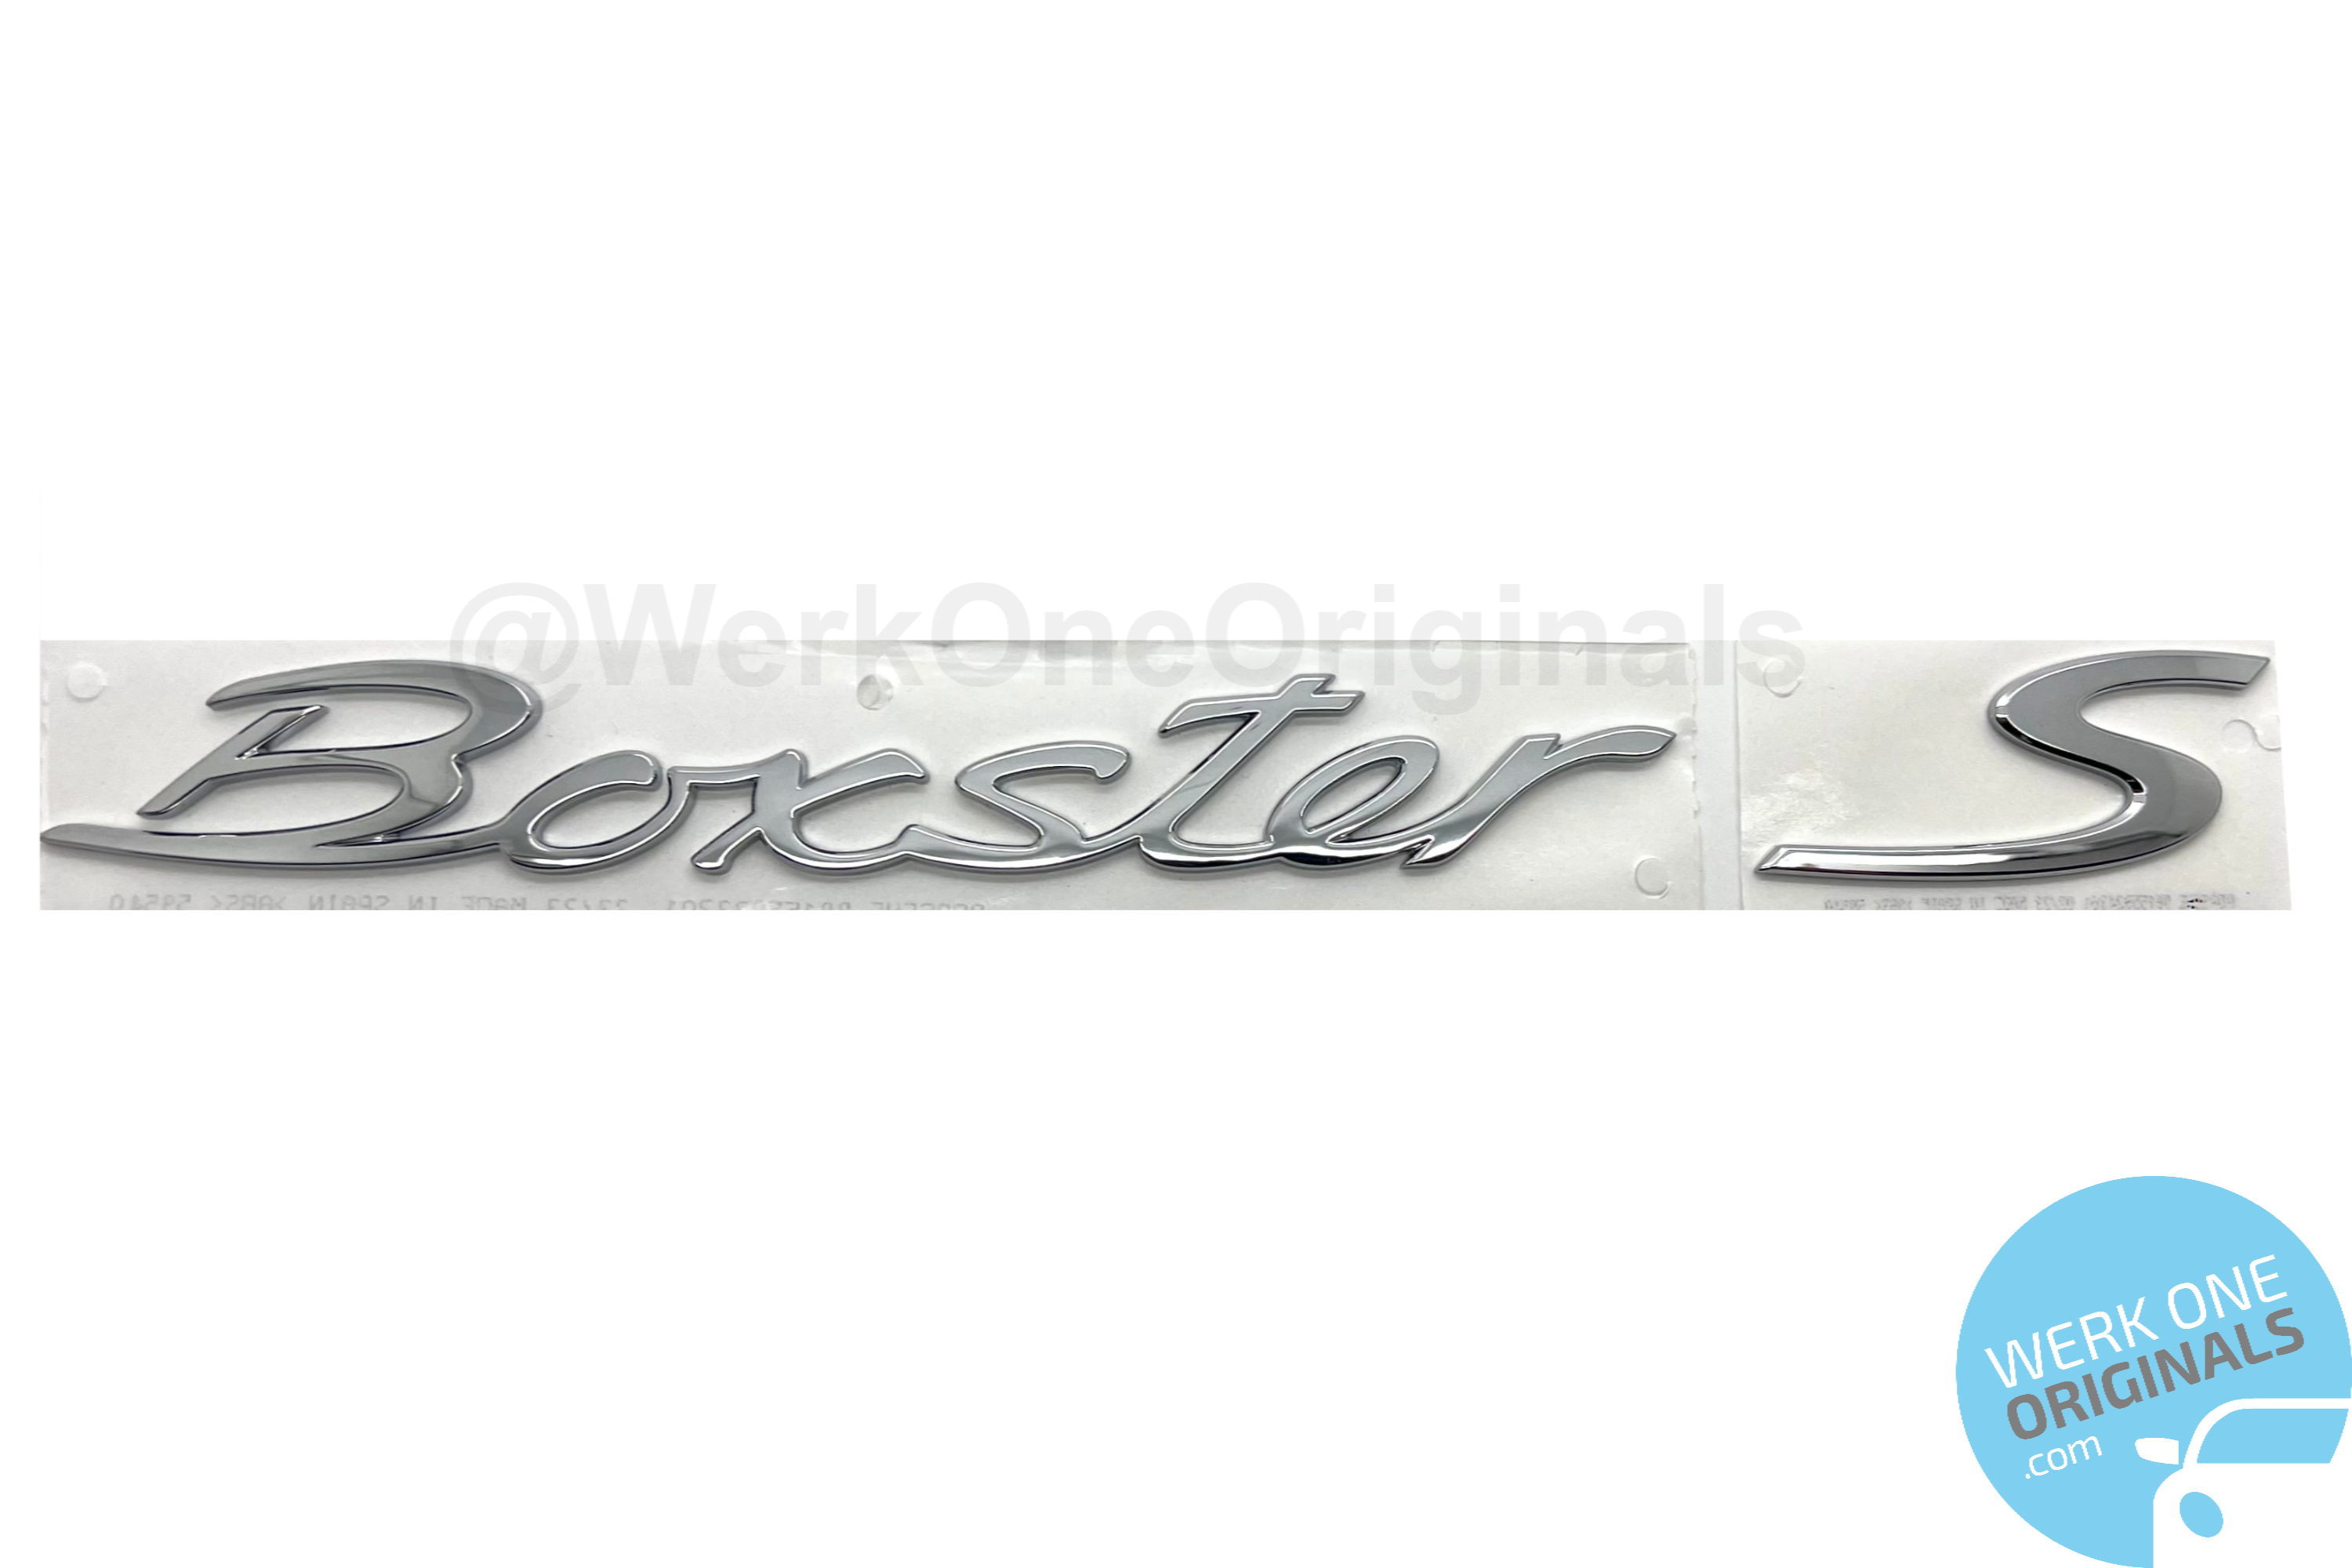 Porsche Official 'Boxster S' Rear Badge Decal in Chrome Silver for Boxster S Type 981 Models